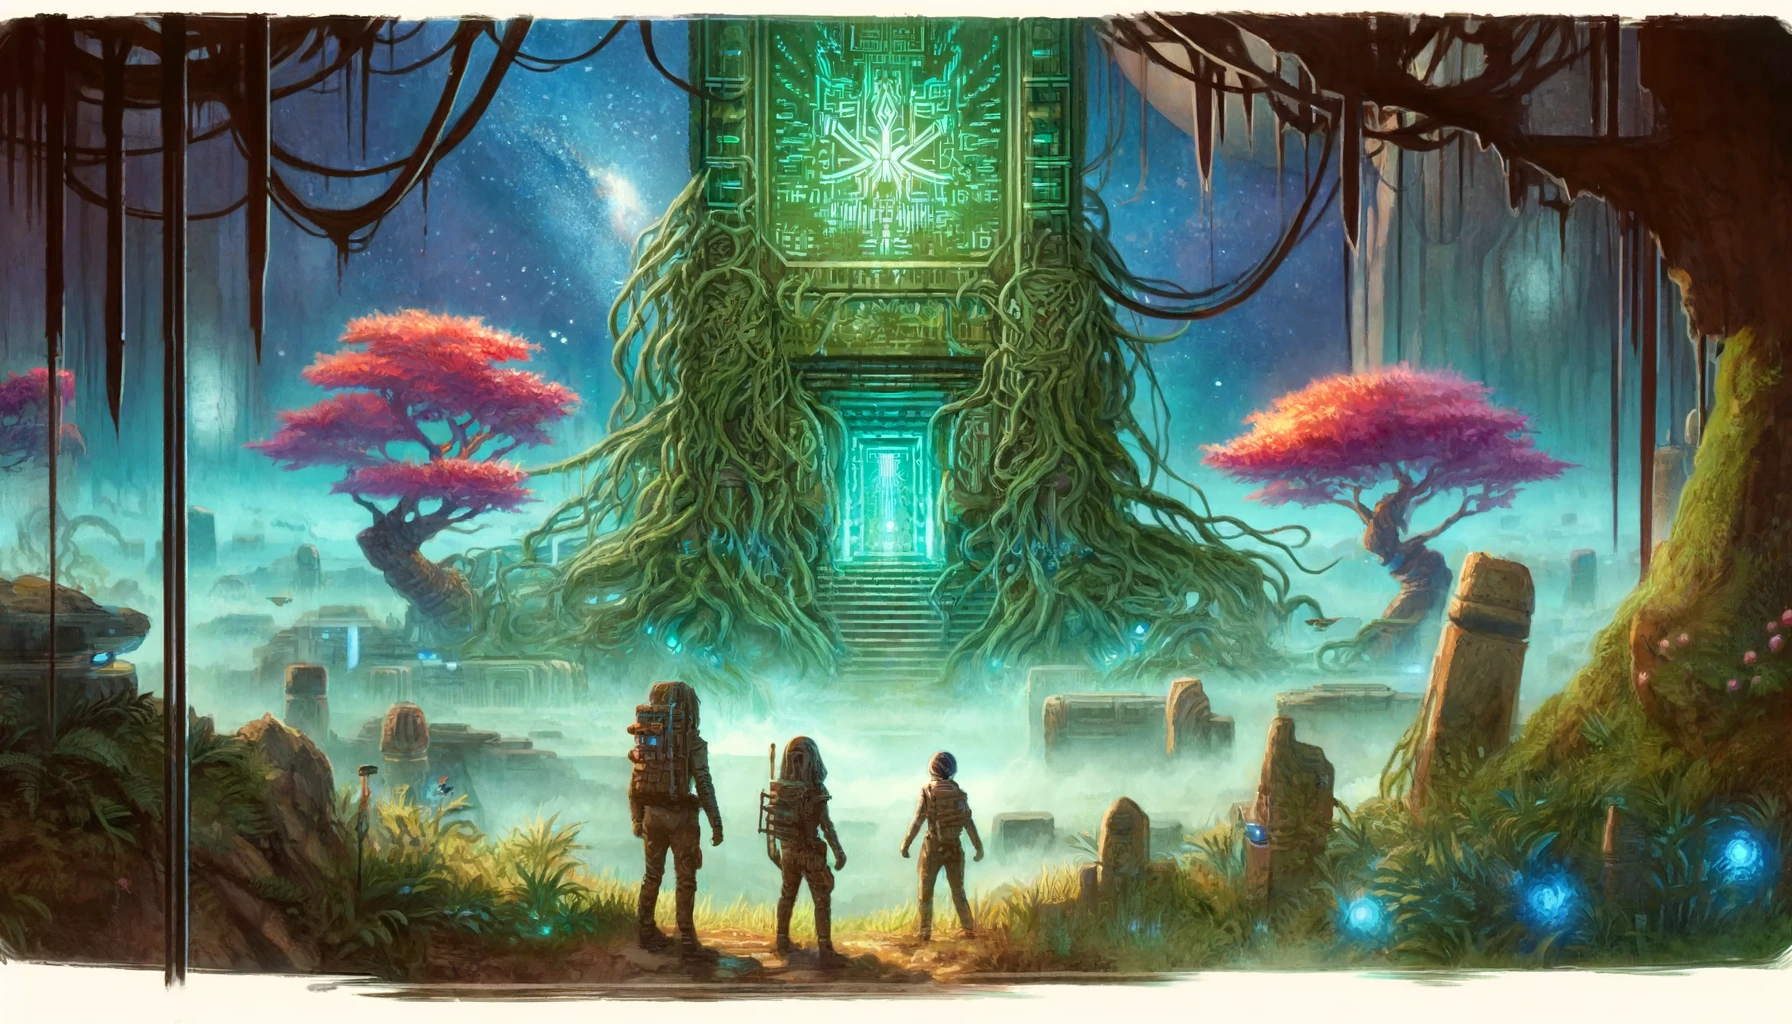 The scene depicts adventurers standing at the entrance of an ancient alien temple, partially covered in vines and bioluminescent plants. Intricate alien runes glow softly, and a large robotic sentinel guards the entrance. The background features a dense, otherworldly jungle with towering trees and a sky filled with strange, colorful celestial bodies.